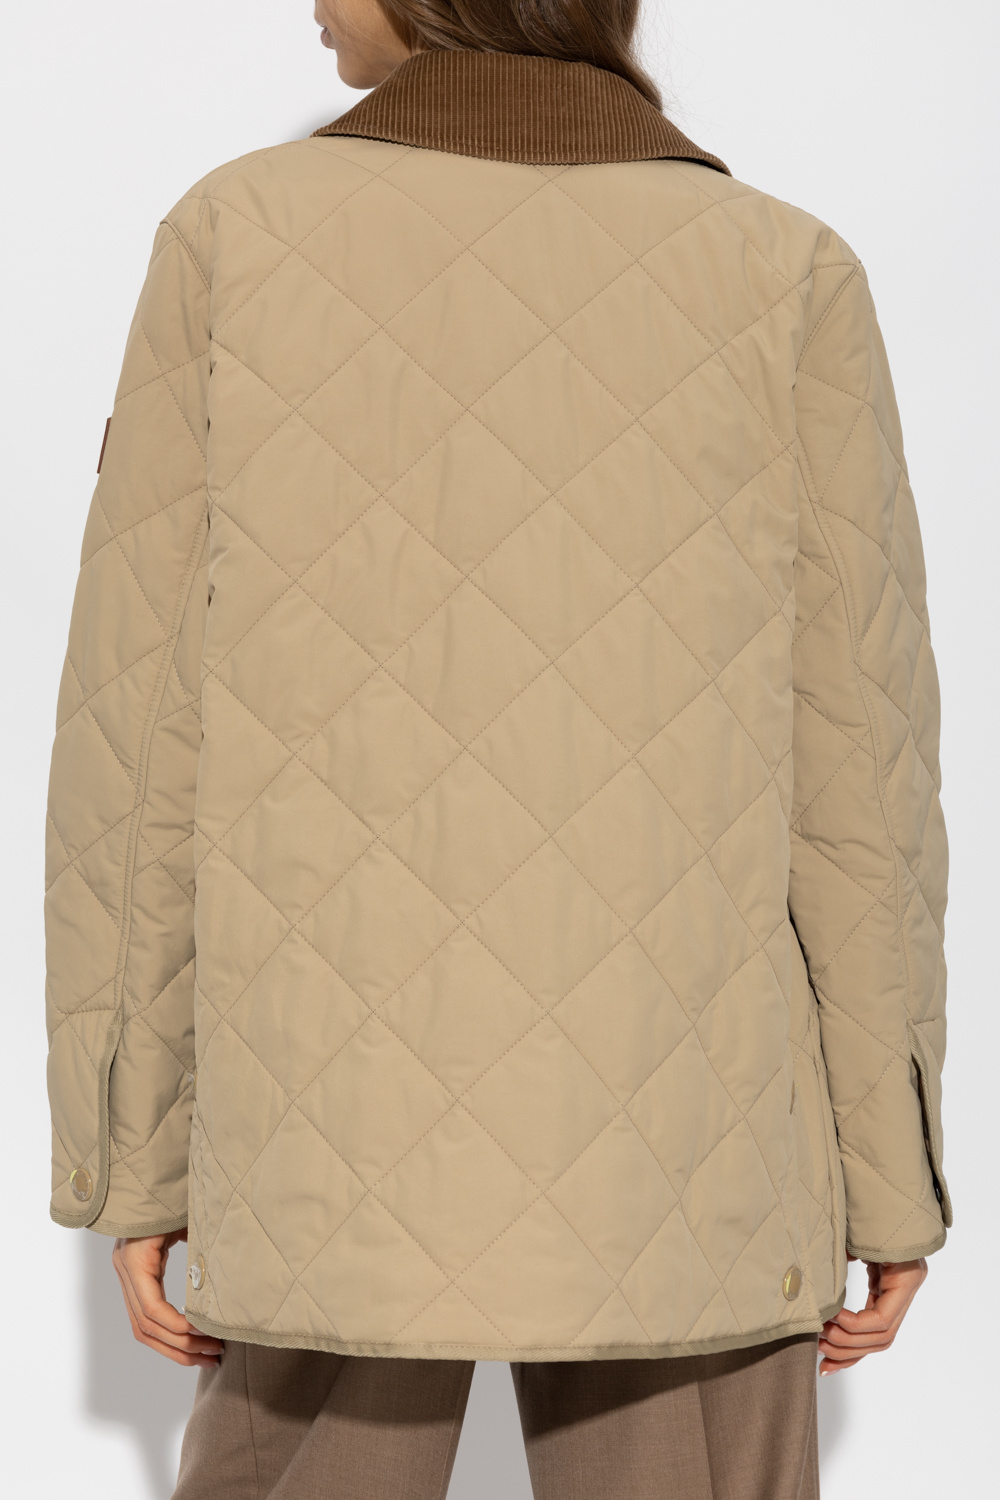 Burberry 'Cotswold' quilted jacket | Women's Clothing | Vitkac